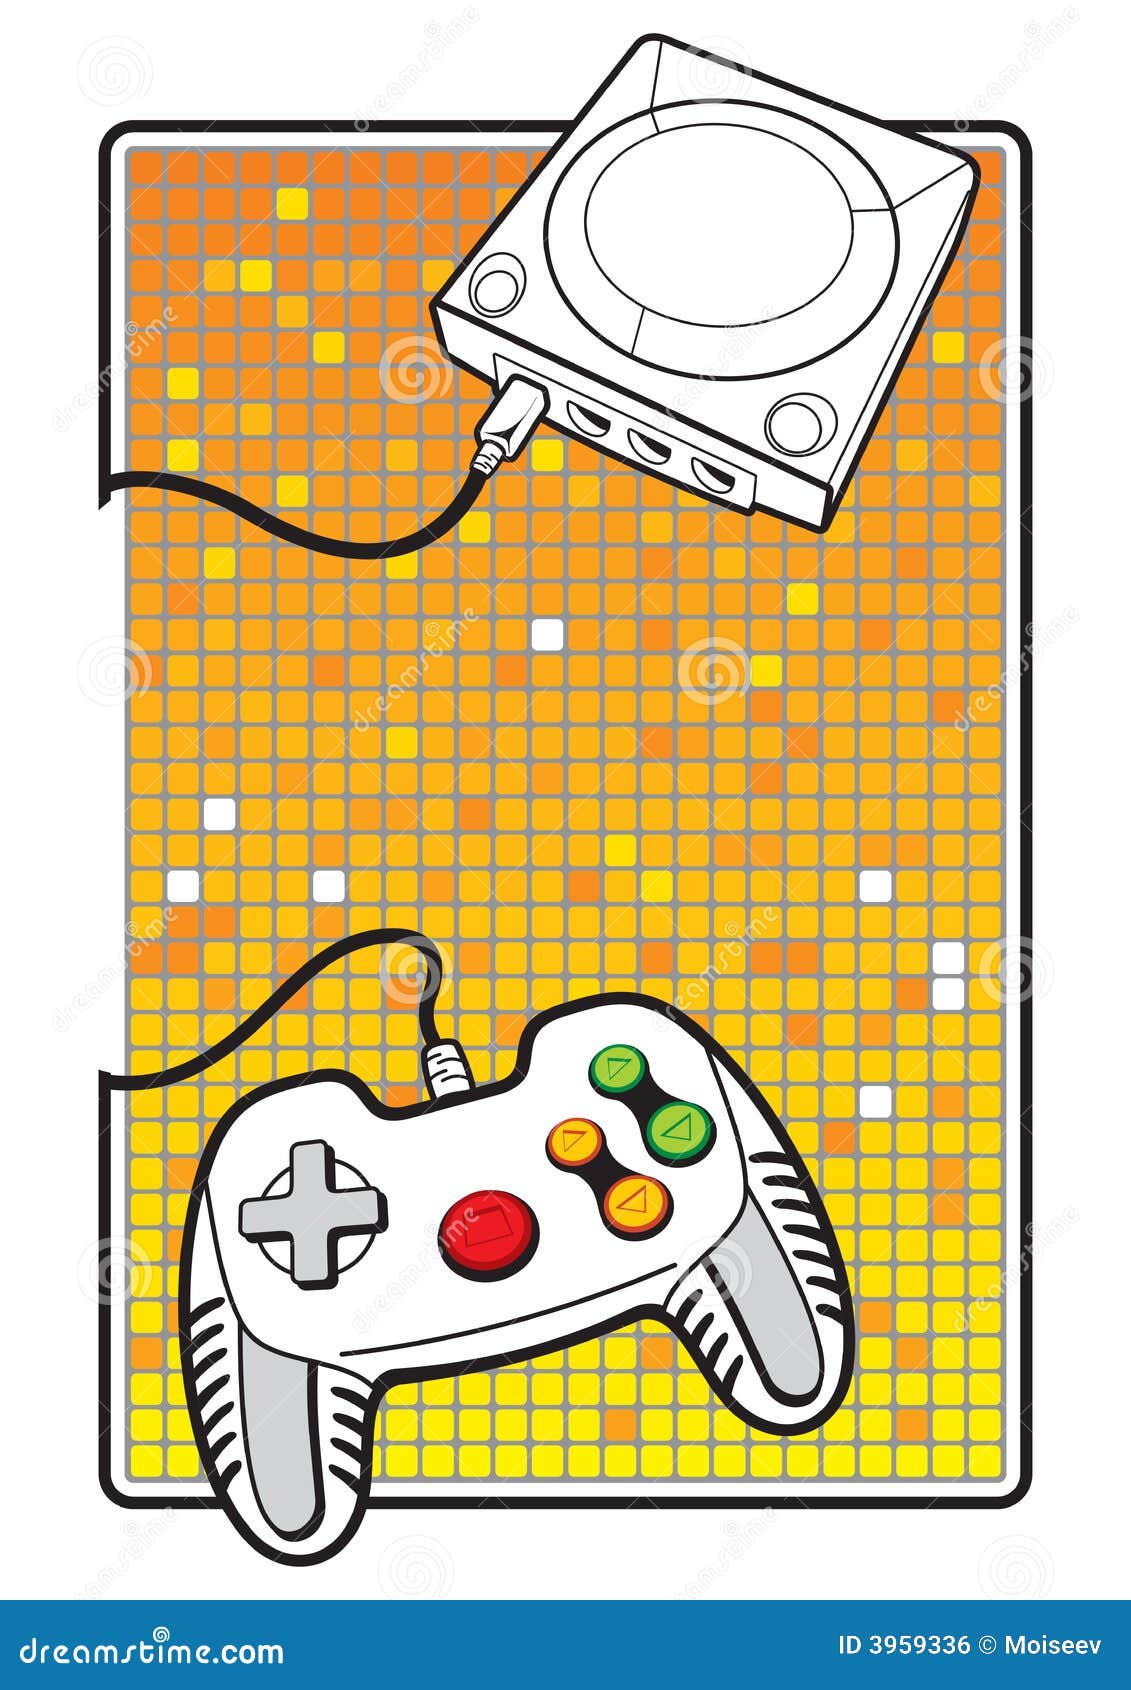 gamepad with console